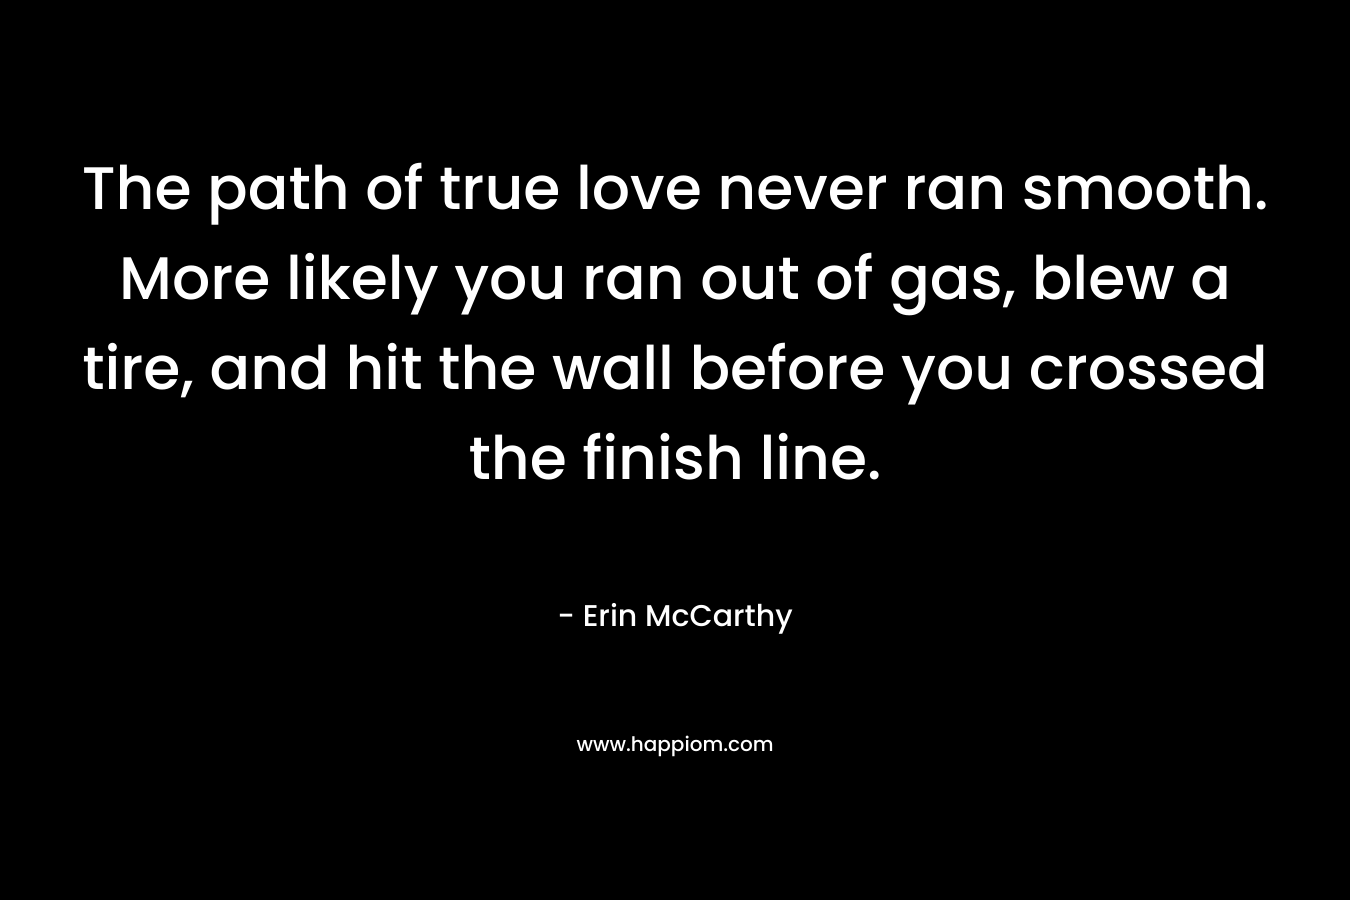 The path of true love never ran smooth. More likely you ran out of gas, blew a tire, and hit the wall before you crossed the finish line. – Erin McCarthy